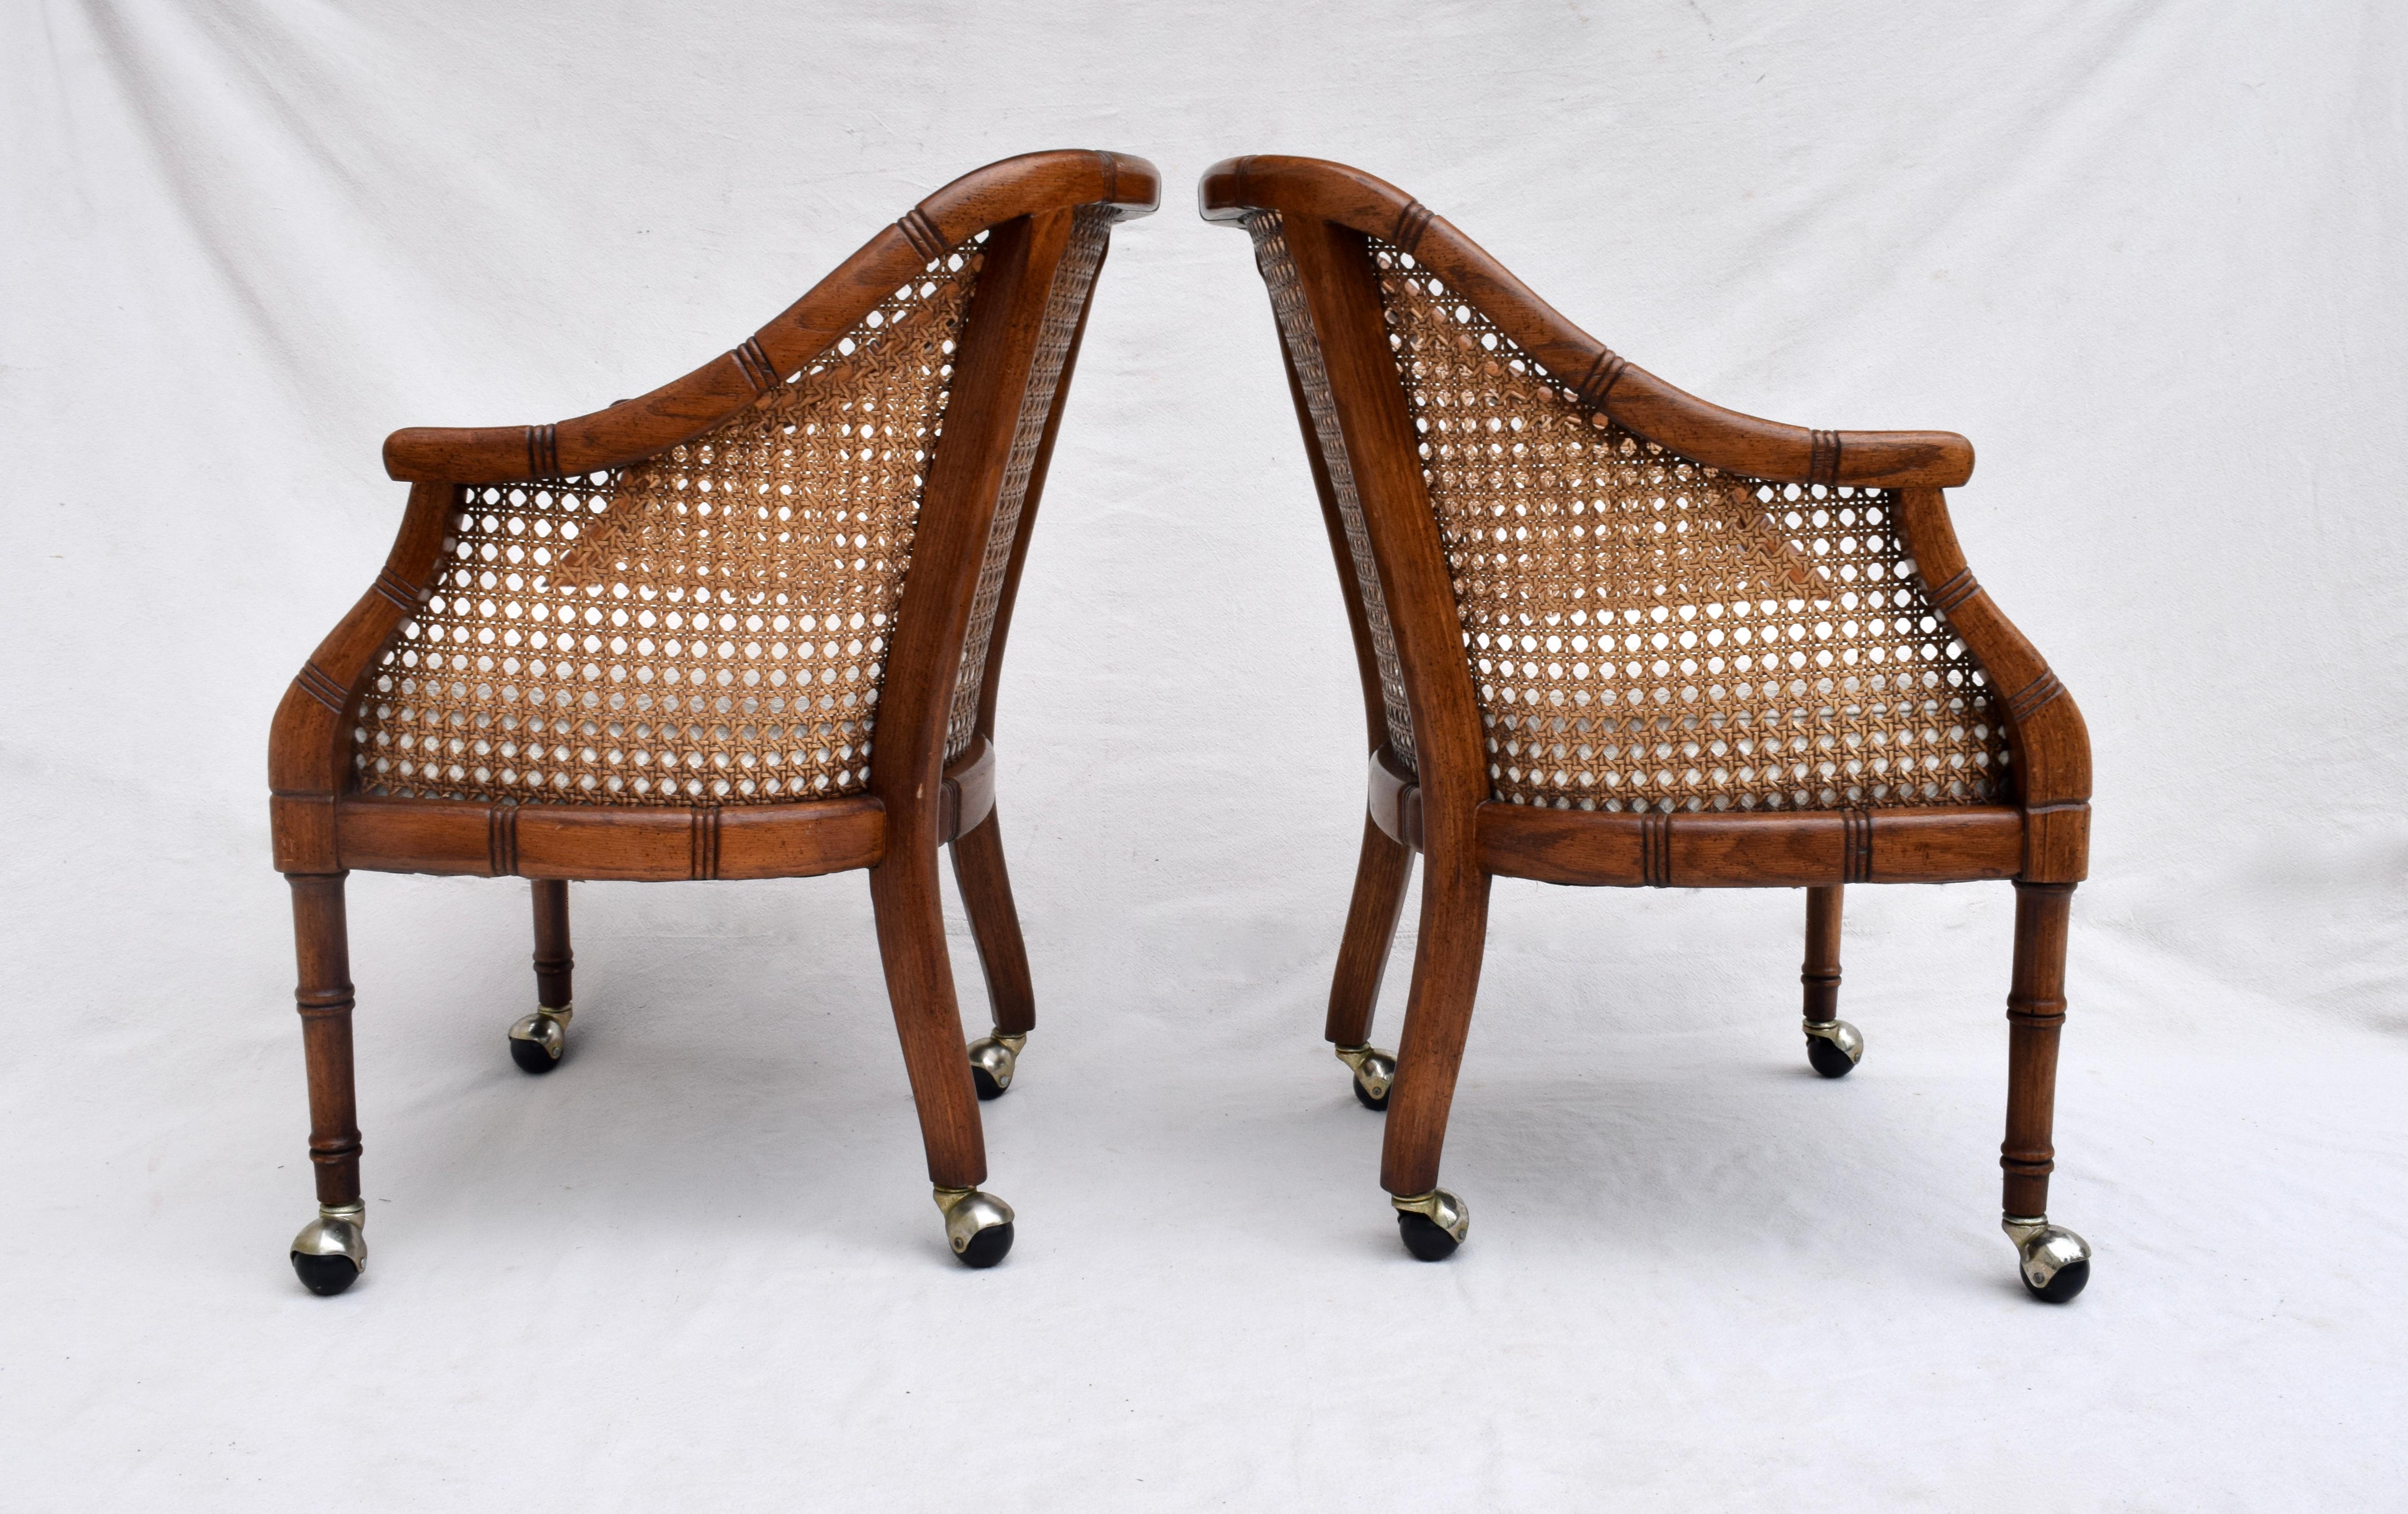 Exceptional pair of Mid-Century Modern barrel chairs in the manner of Harvey Probber featuring faux-bamboo wooden frames on casters with caned backs and sides. New custom stationary seats are upholstered in hand loomed & textured cotton tapestry